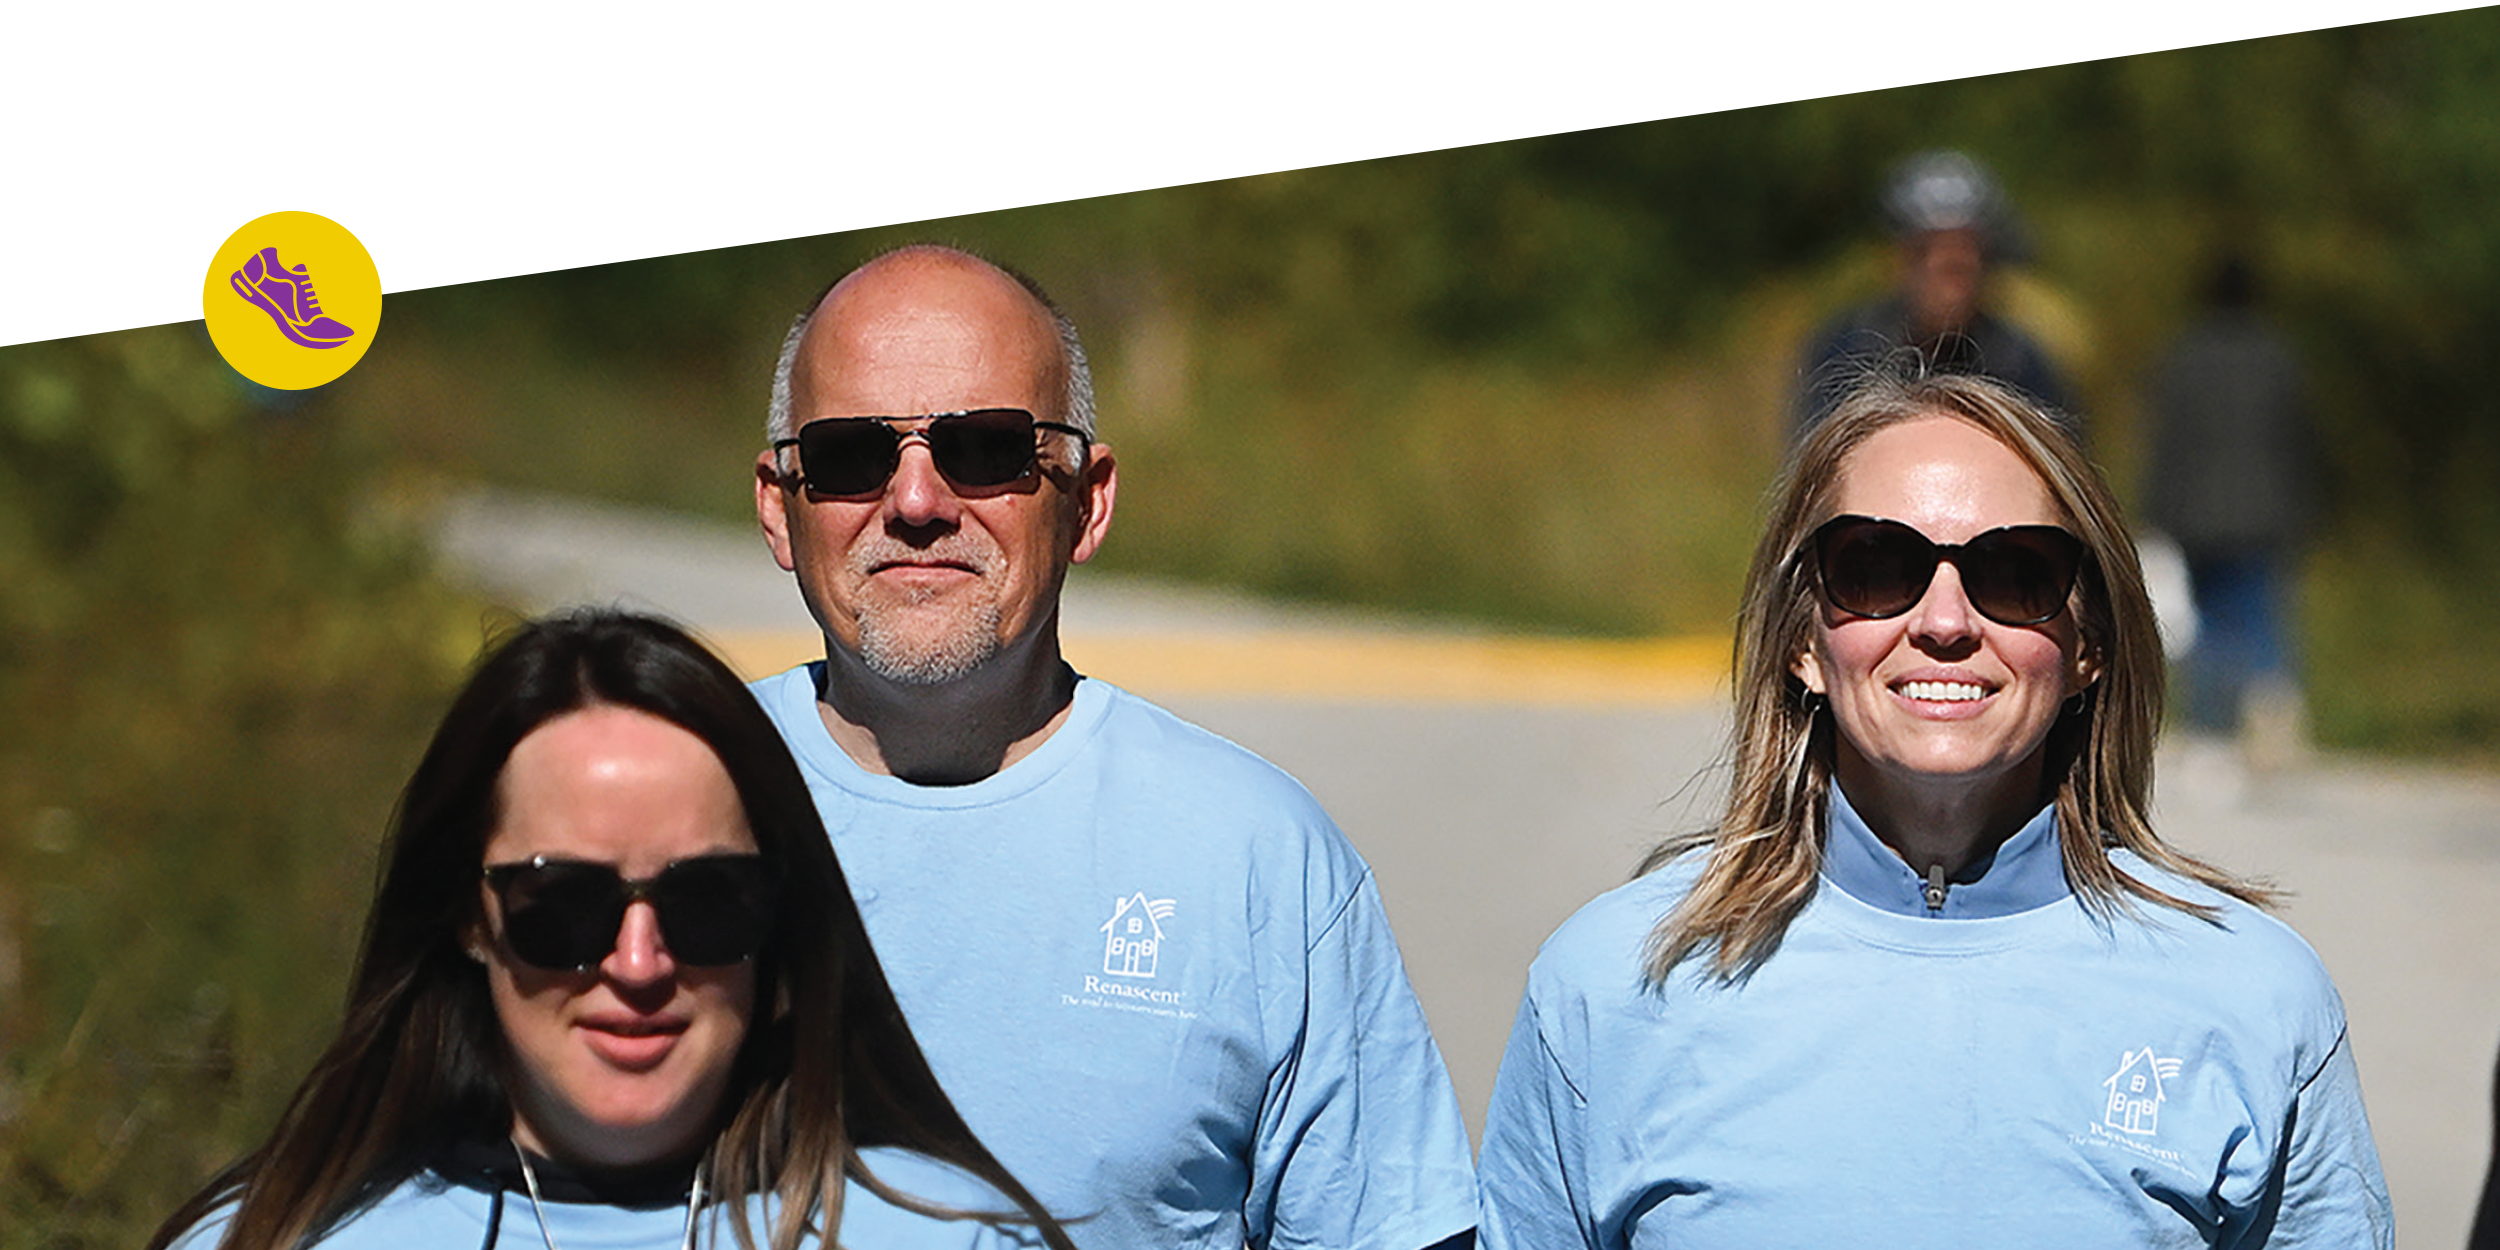 A photographic style image of Tammie and her husband during the Road to Recovery Annual Walk-A-Thon.